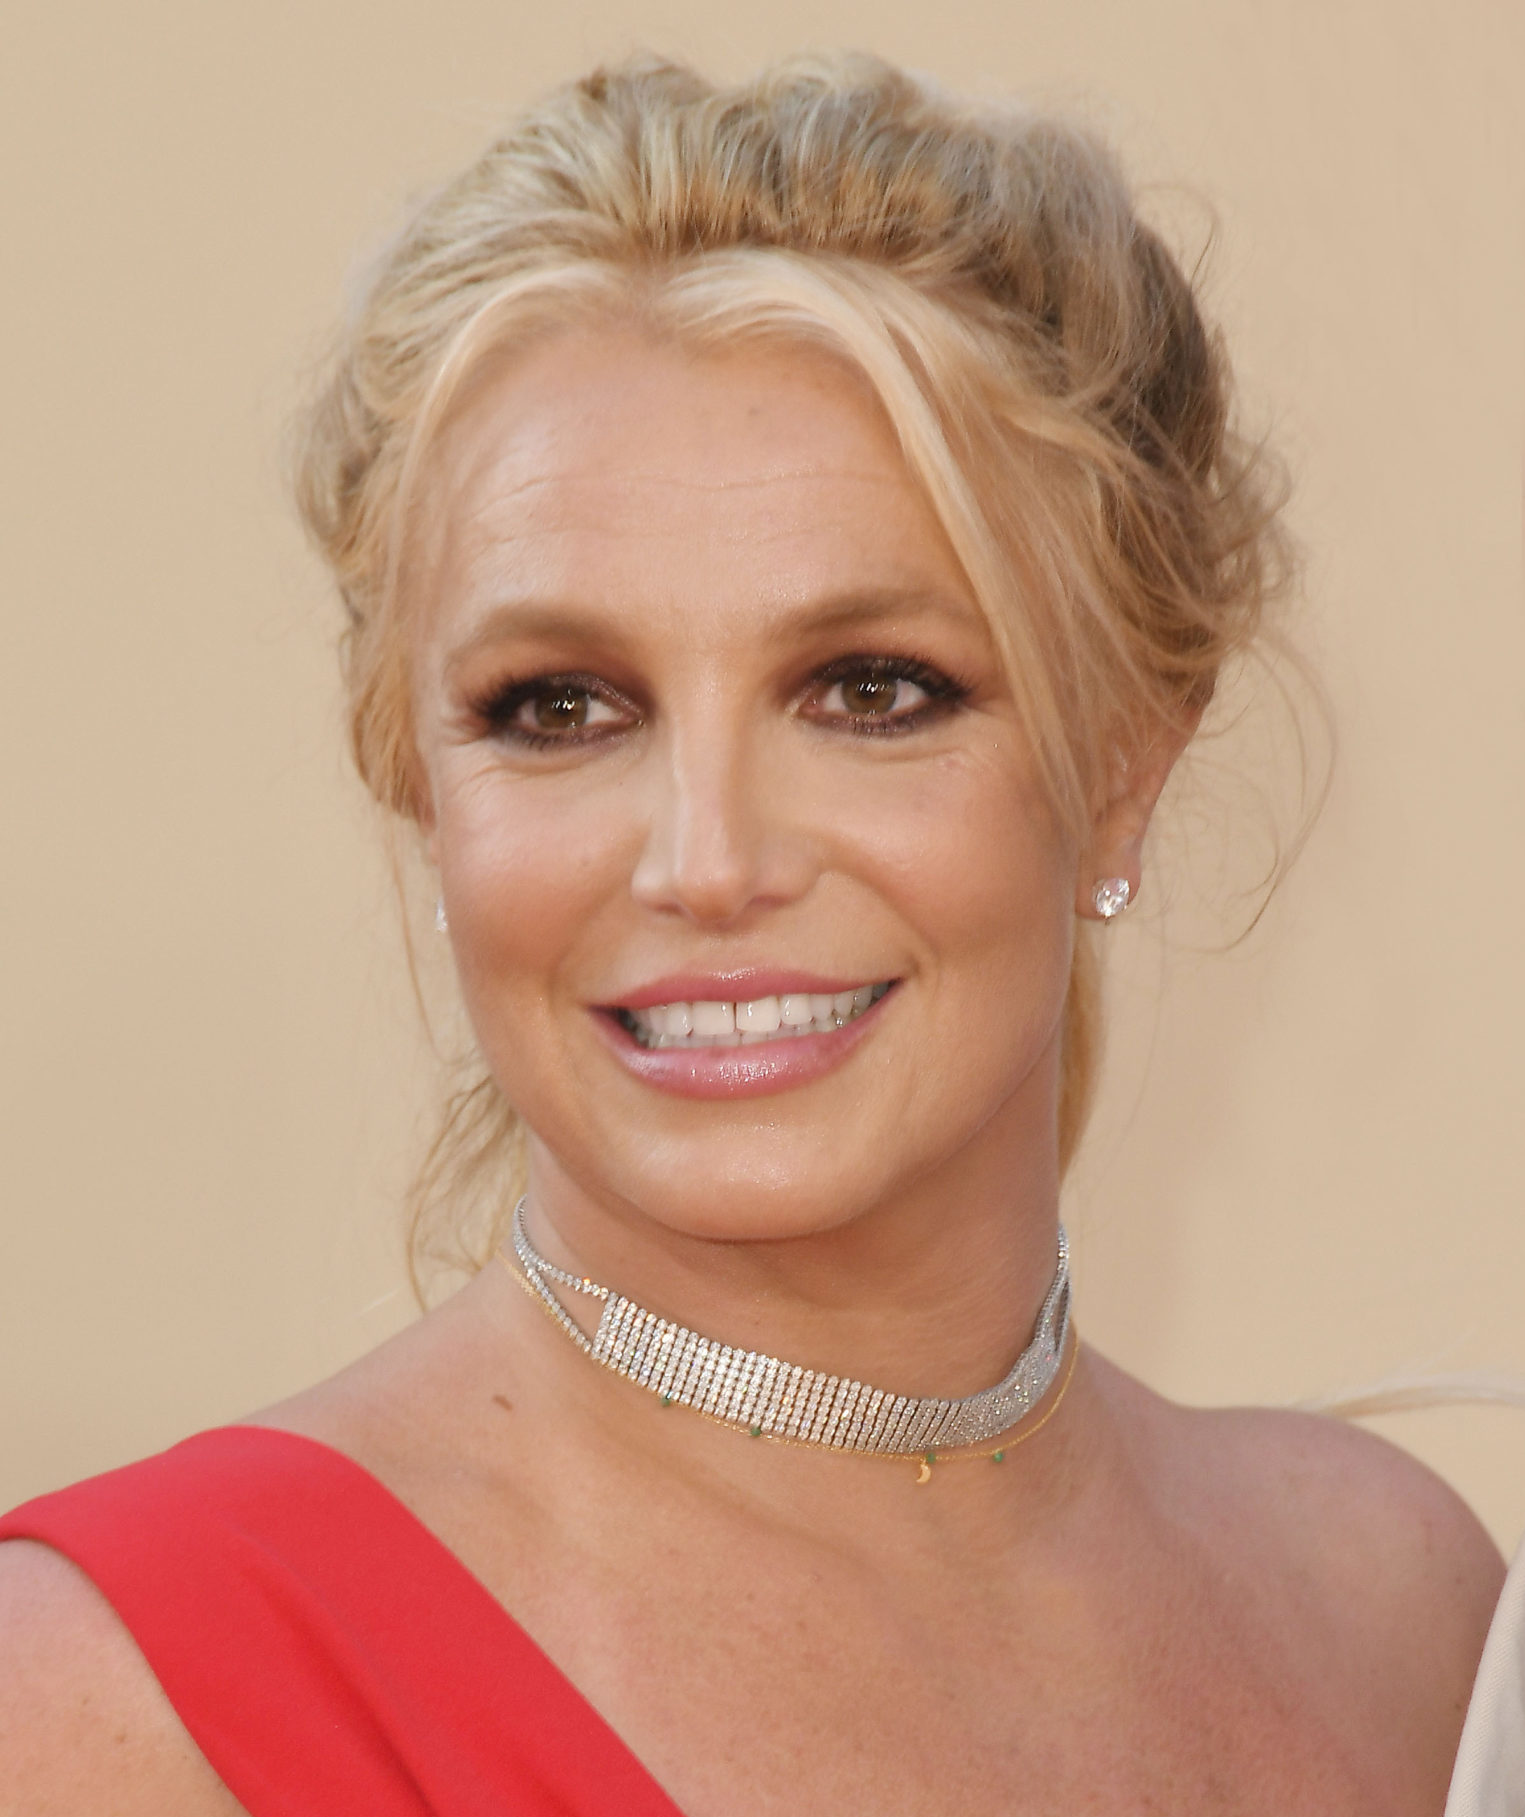 Britney Spears arrives at the TCL Chinese Theatre in Hollywood, California in July 2019.